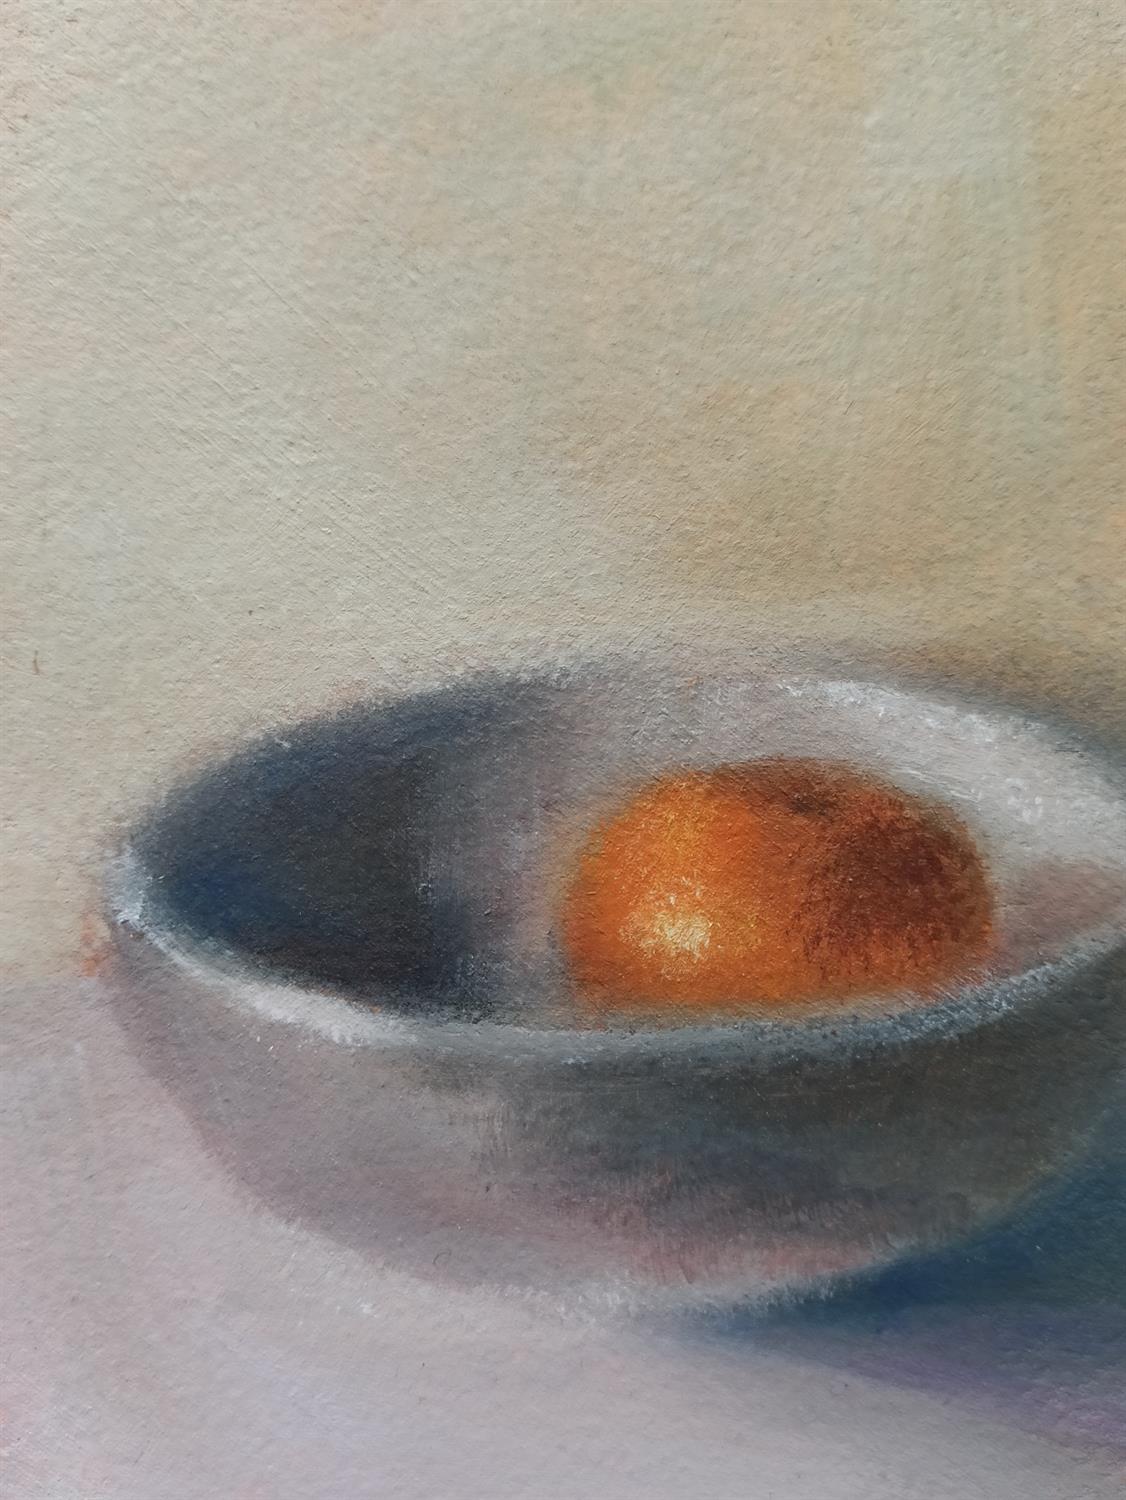 Michelle Maddox, Clementine Still Life, 2021 - Image 3 of 3